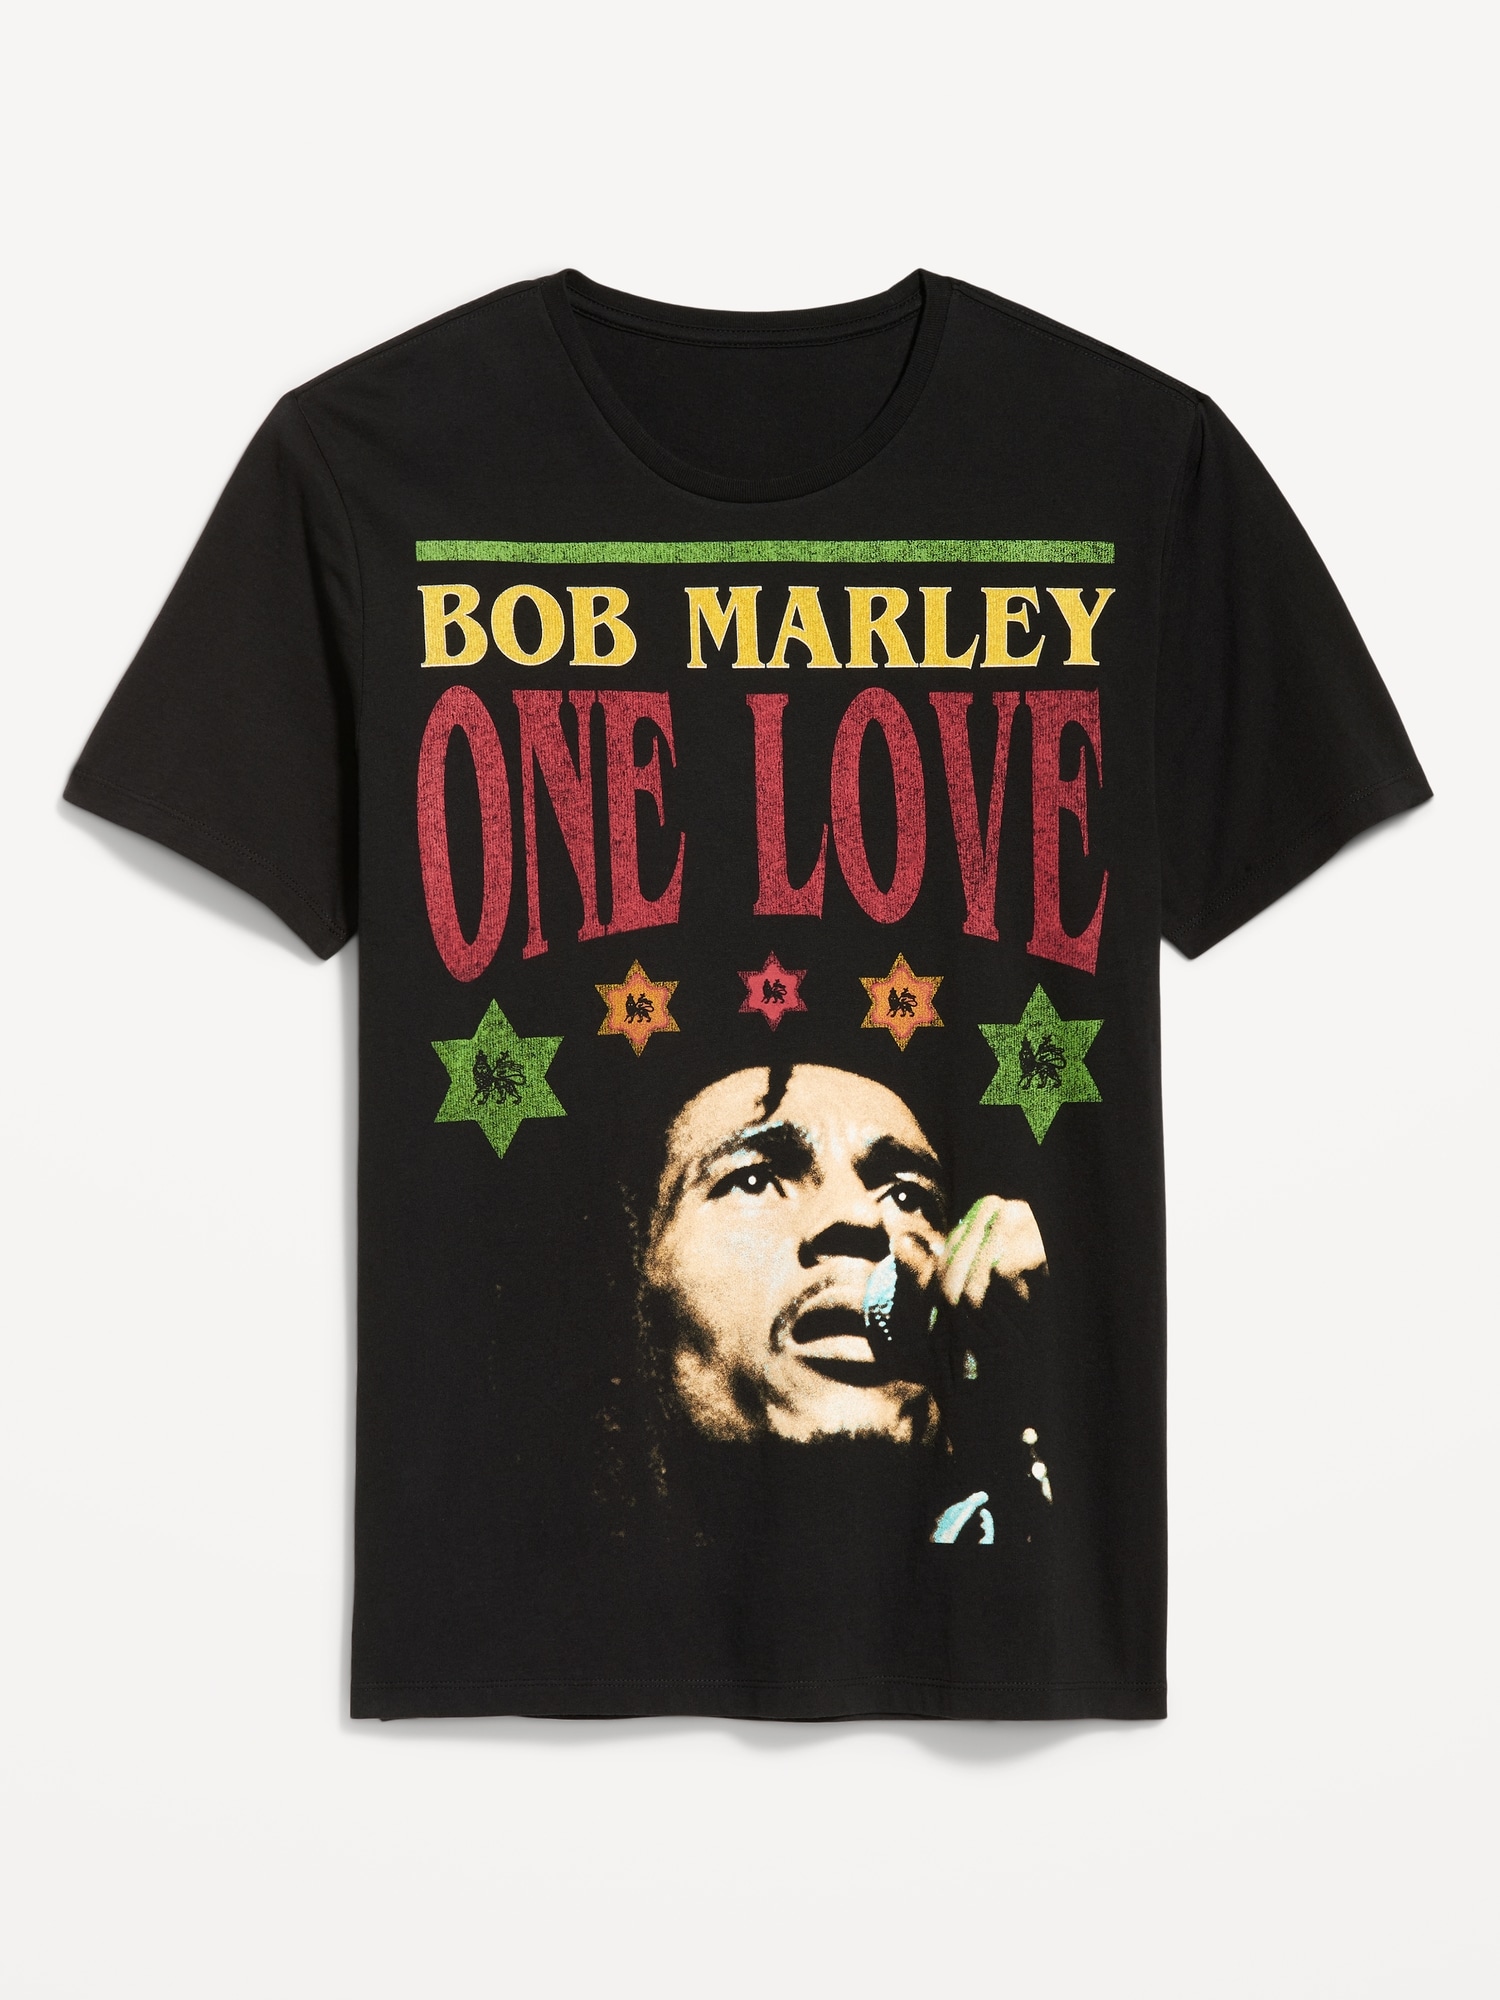 Bob Marley Gender-Neutral T-Shirt for Adults